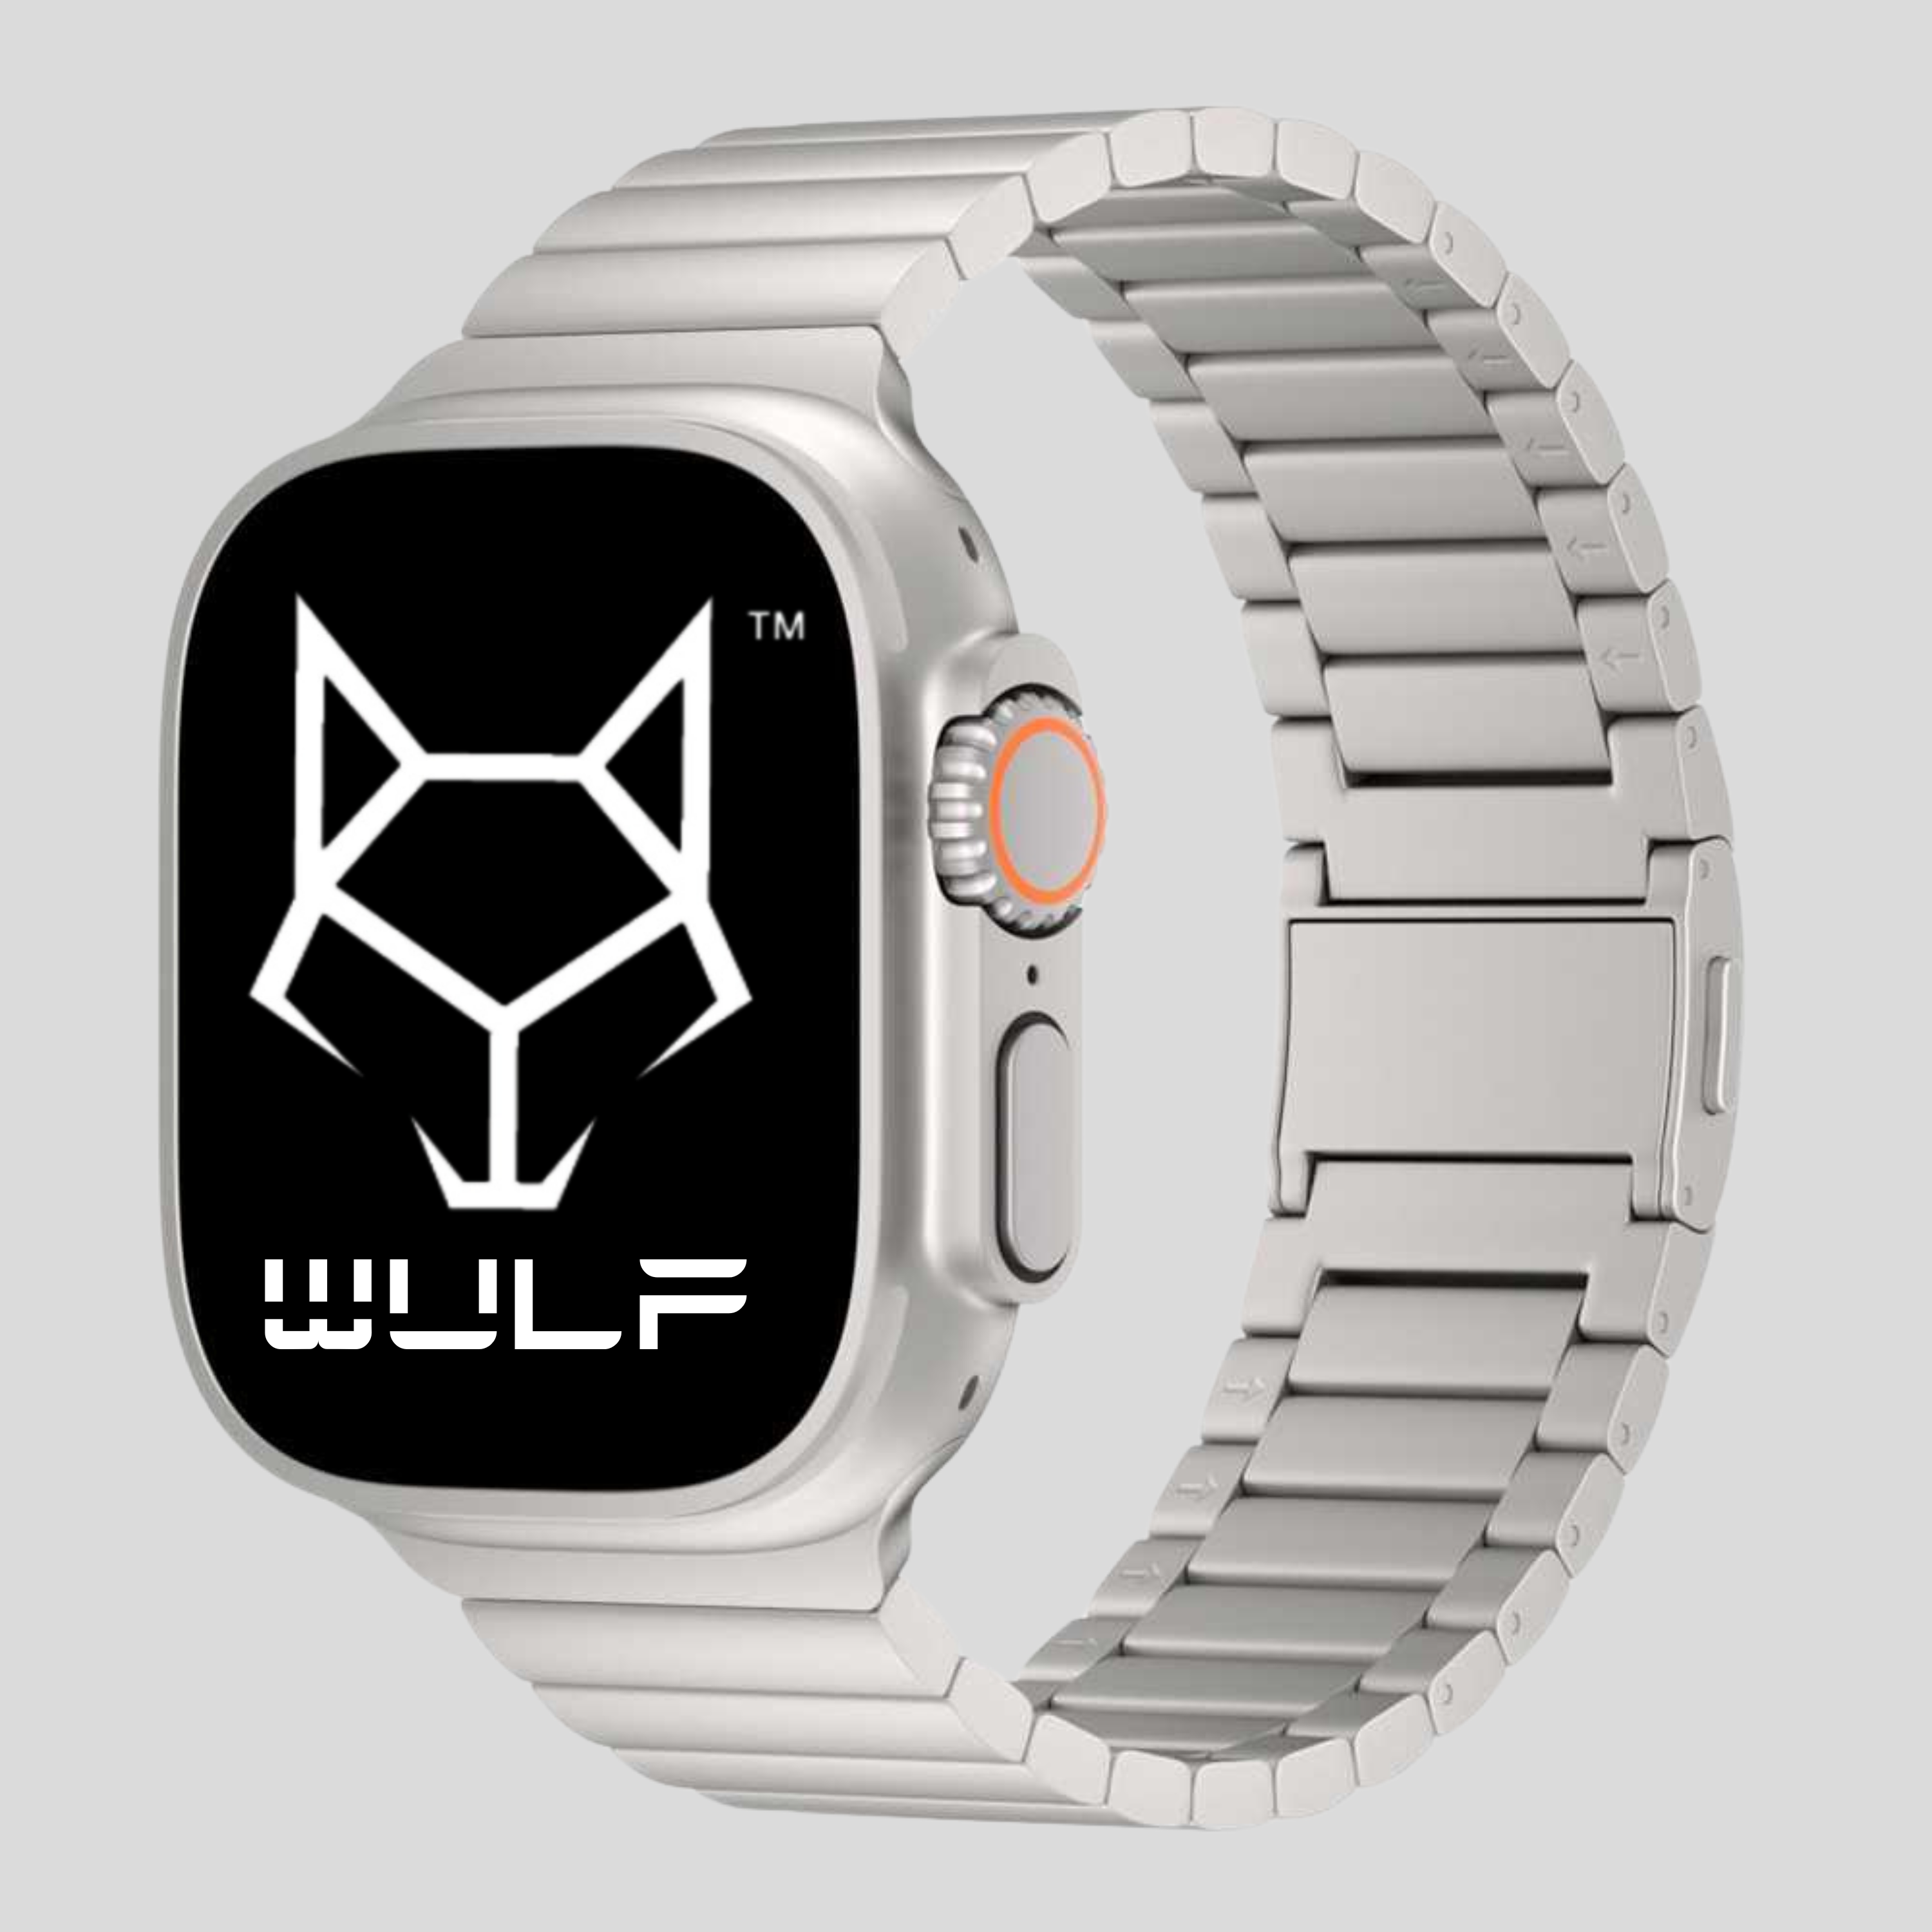 WULF Titanium Premium Watch Band - Made for the Apple Watch